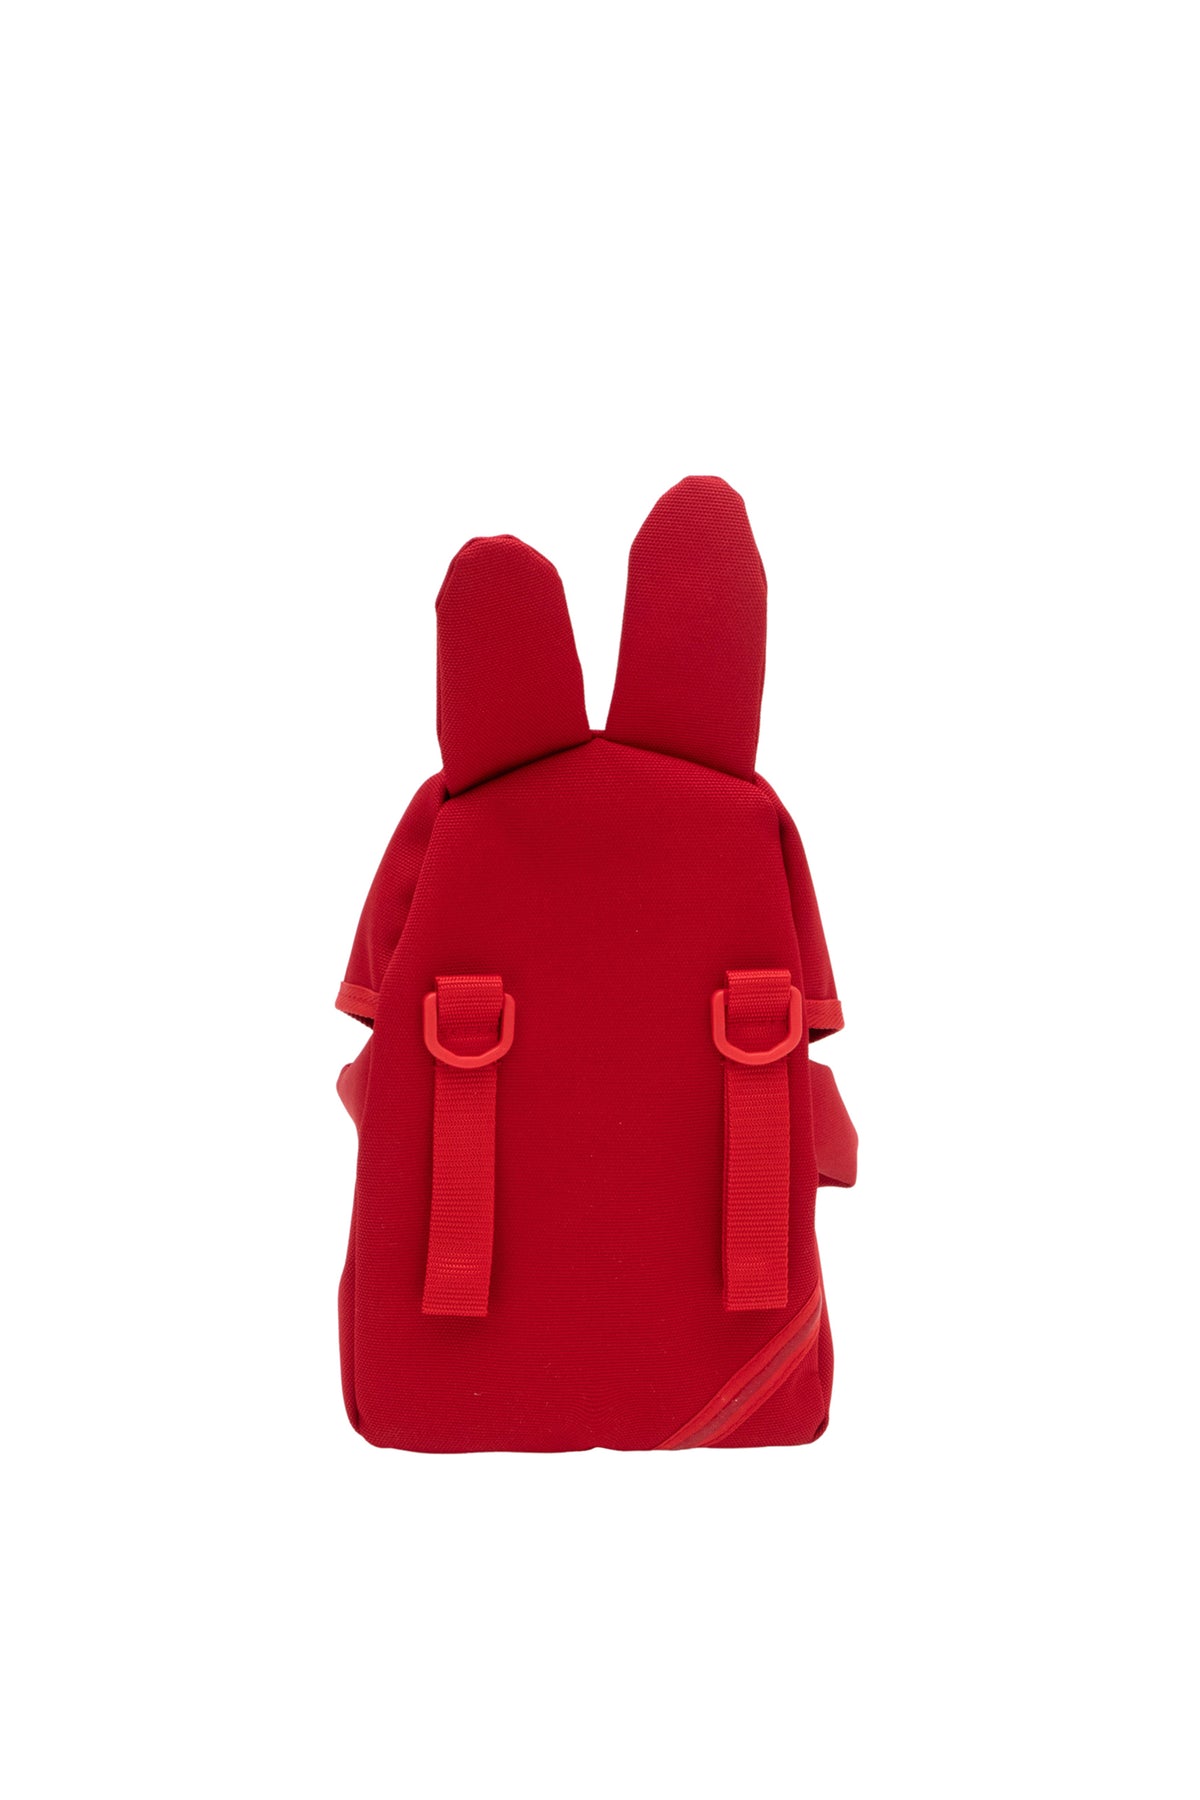 RABBIT POUCH/RED